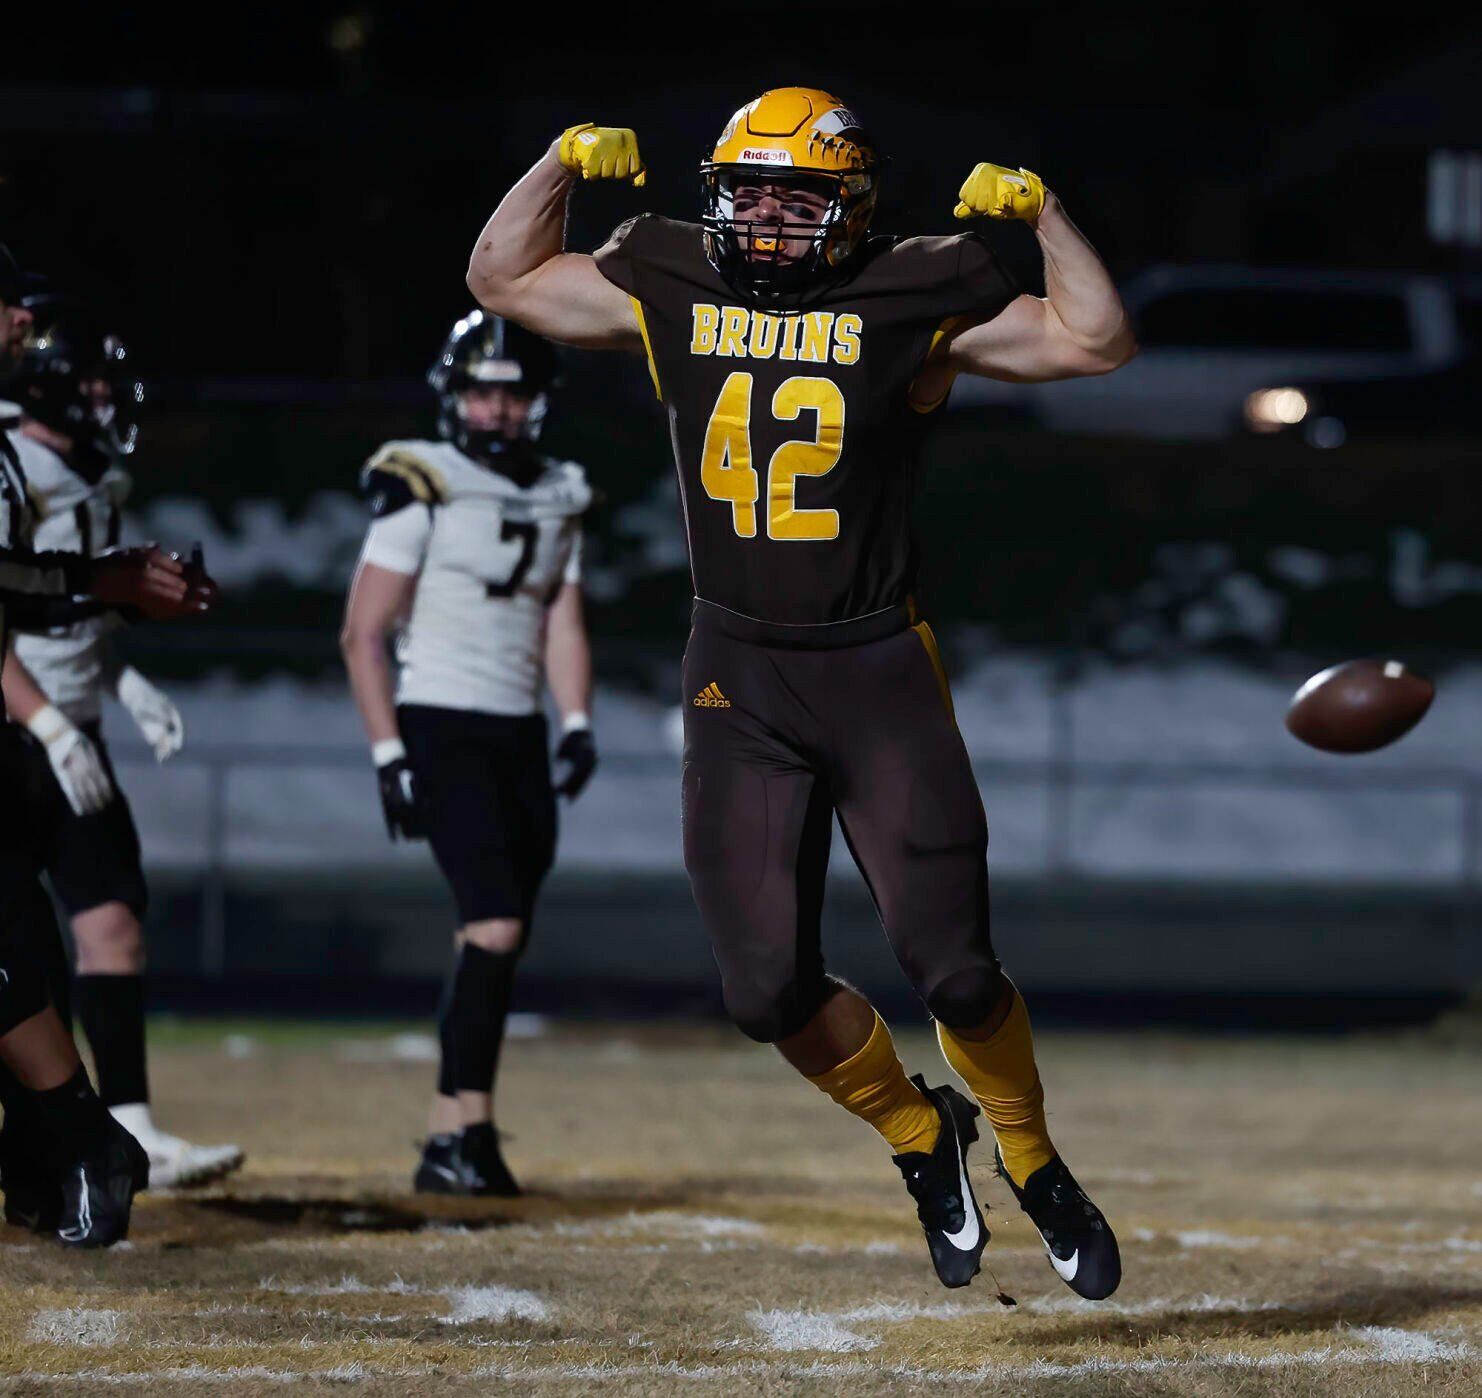 Helena Capital’s Quarterback Shines in Playoff Debut as Bruins Triumph 28-6 and Advance to Title Rematch against No.1 Bozeman